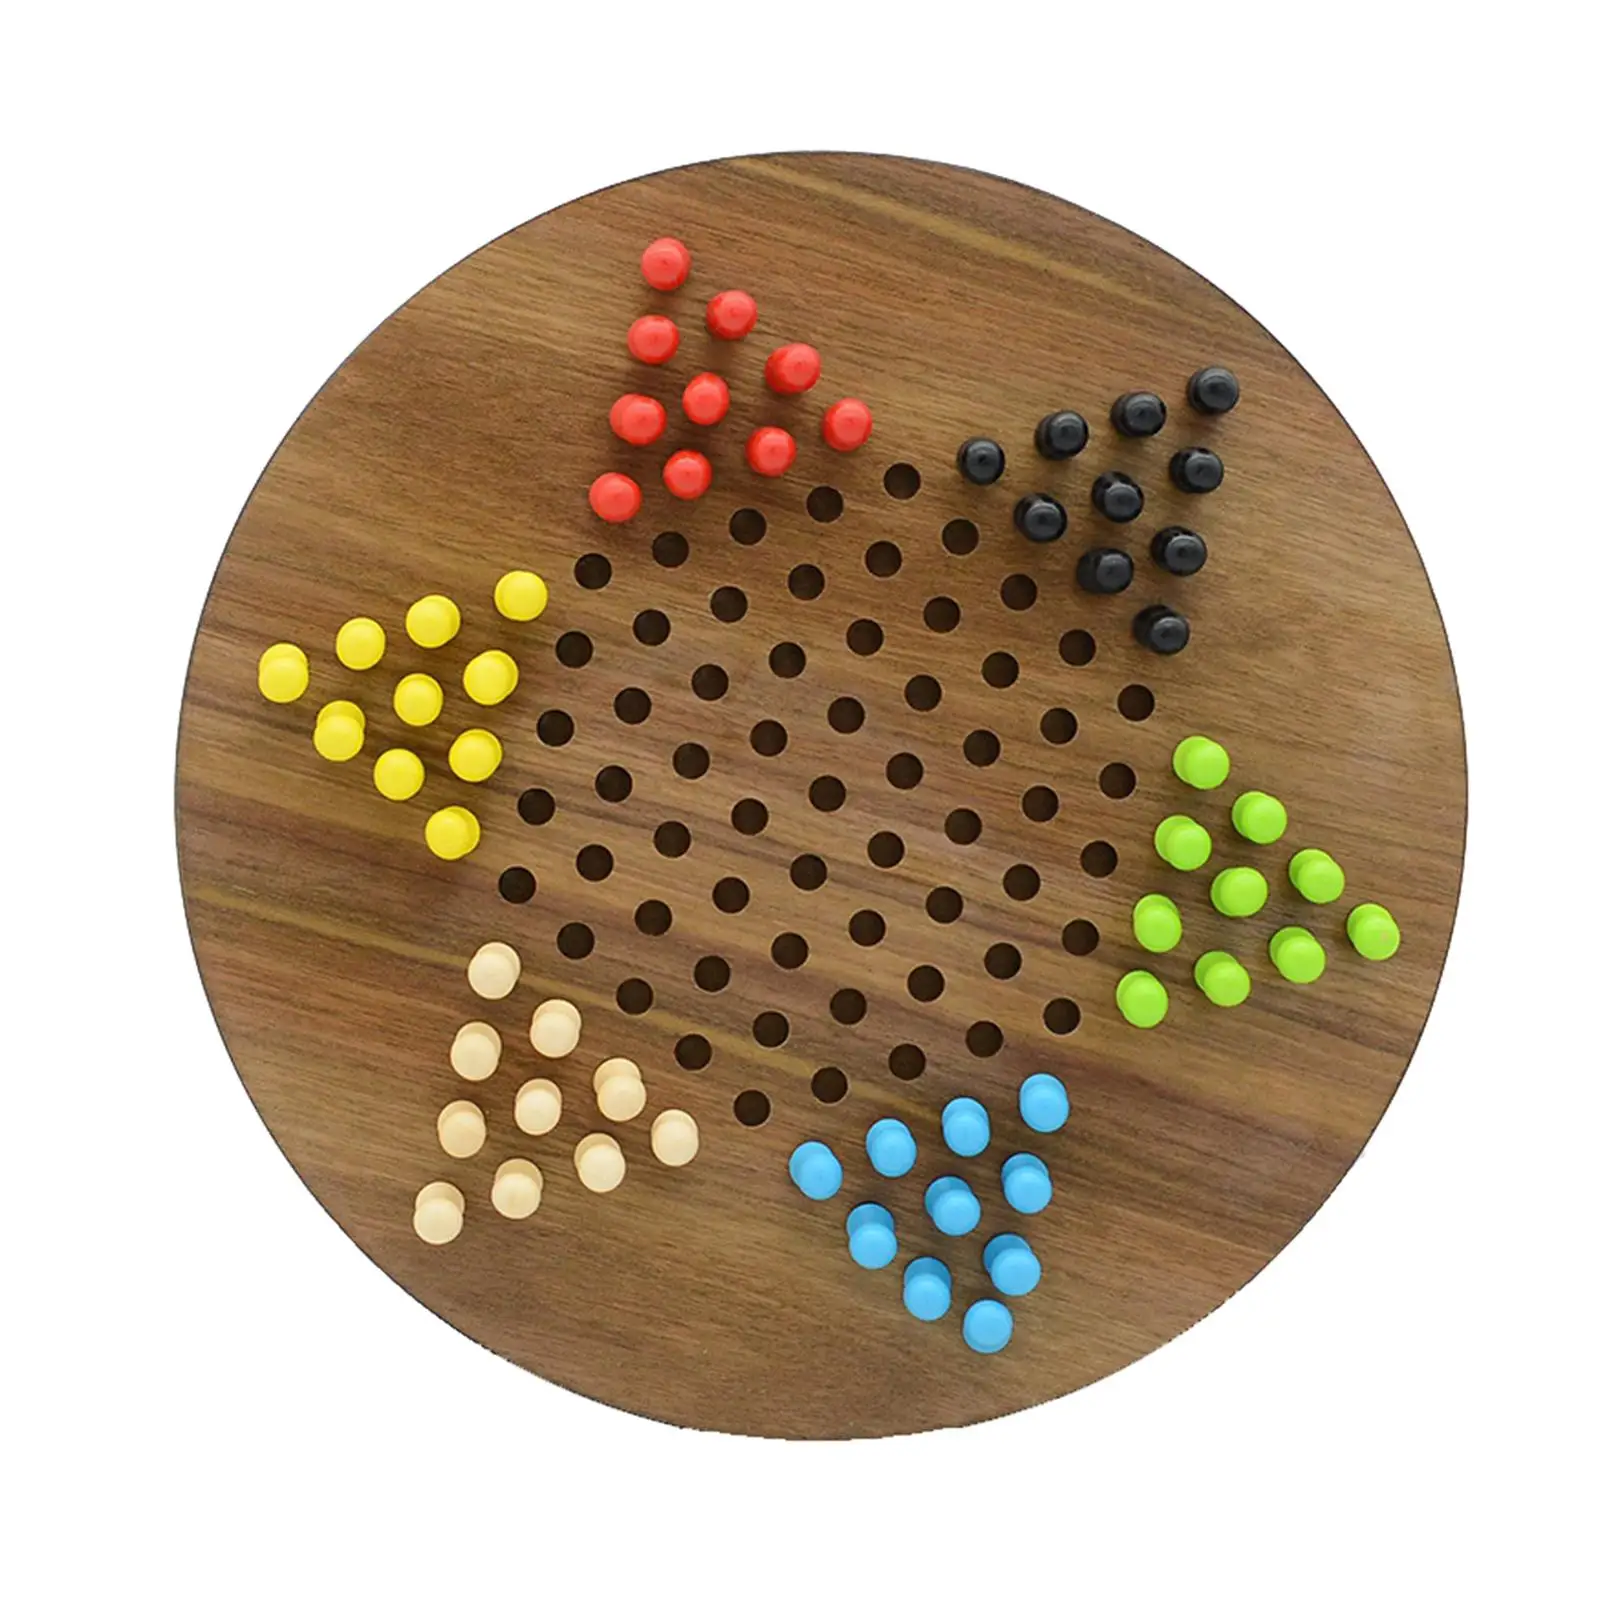 Wooden Chinese Checkers with Marbles Includes 60 Colorful Preschool Learning Activities Toy Chinese Checkers Game for Children